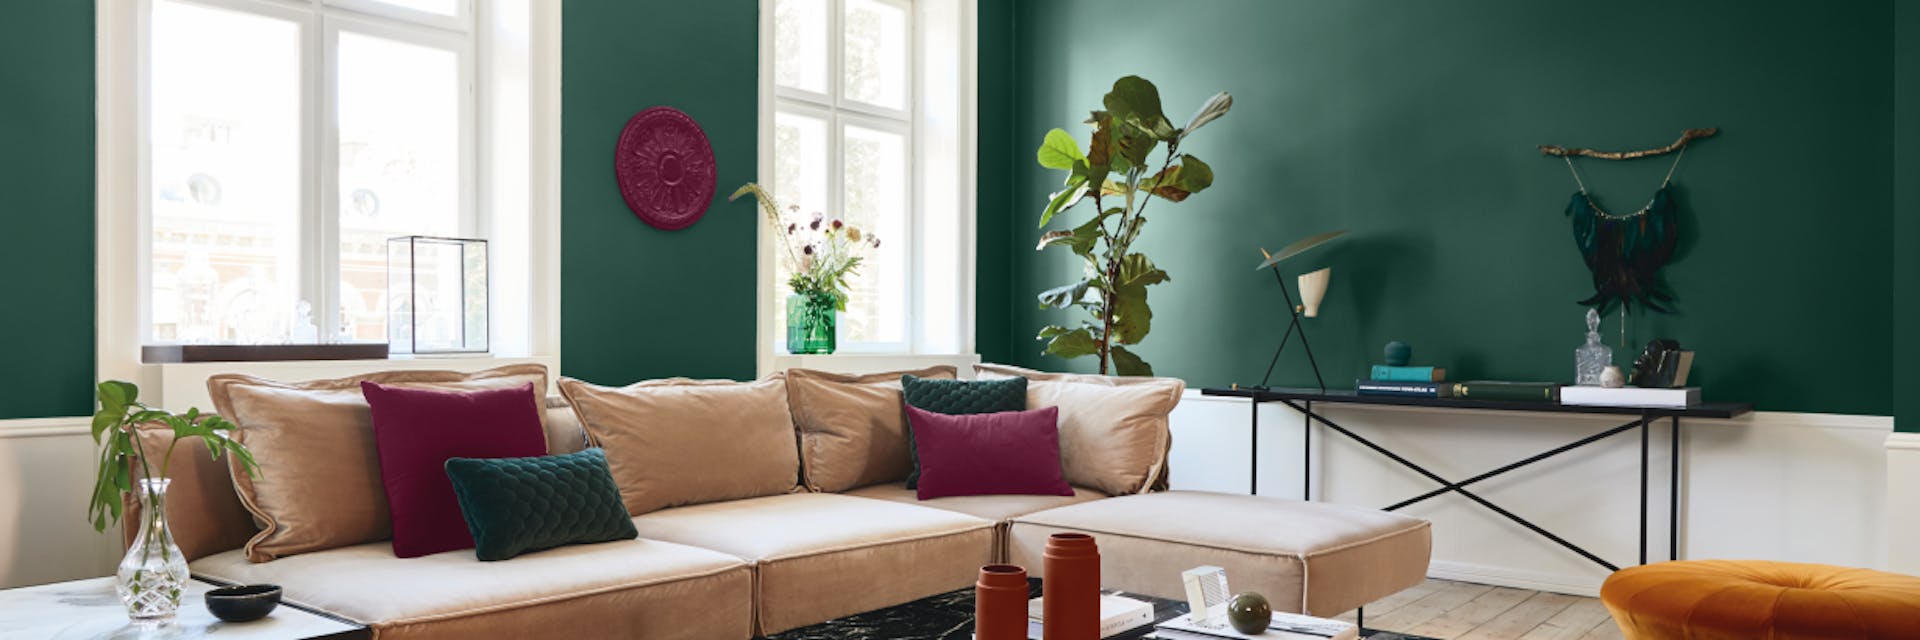 COLOR ON TREND – DEEP MOSSY OLIVE GREEN  Living room green, Bedroom green,  Green rooms